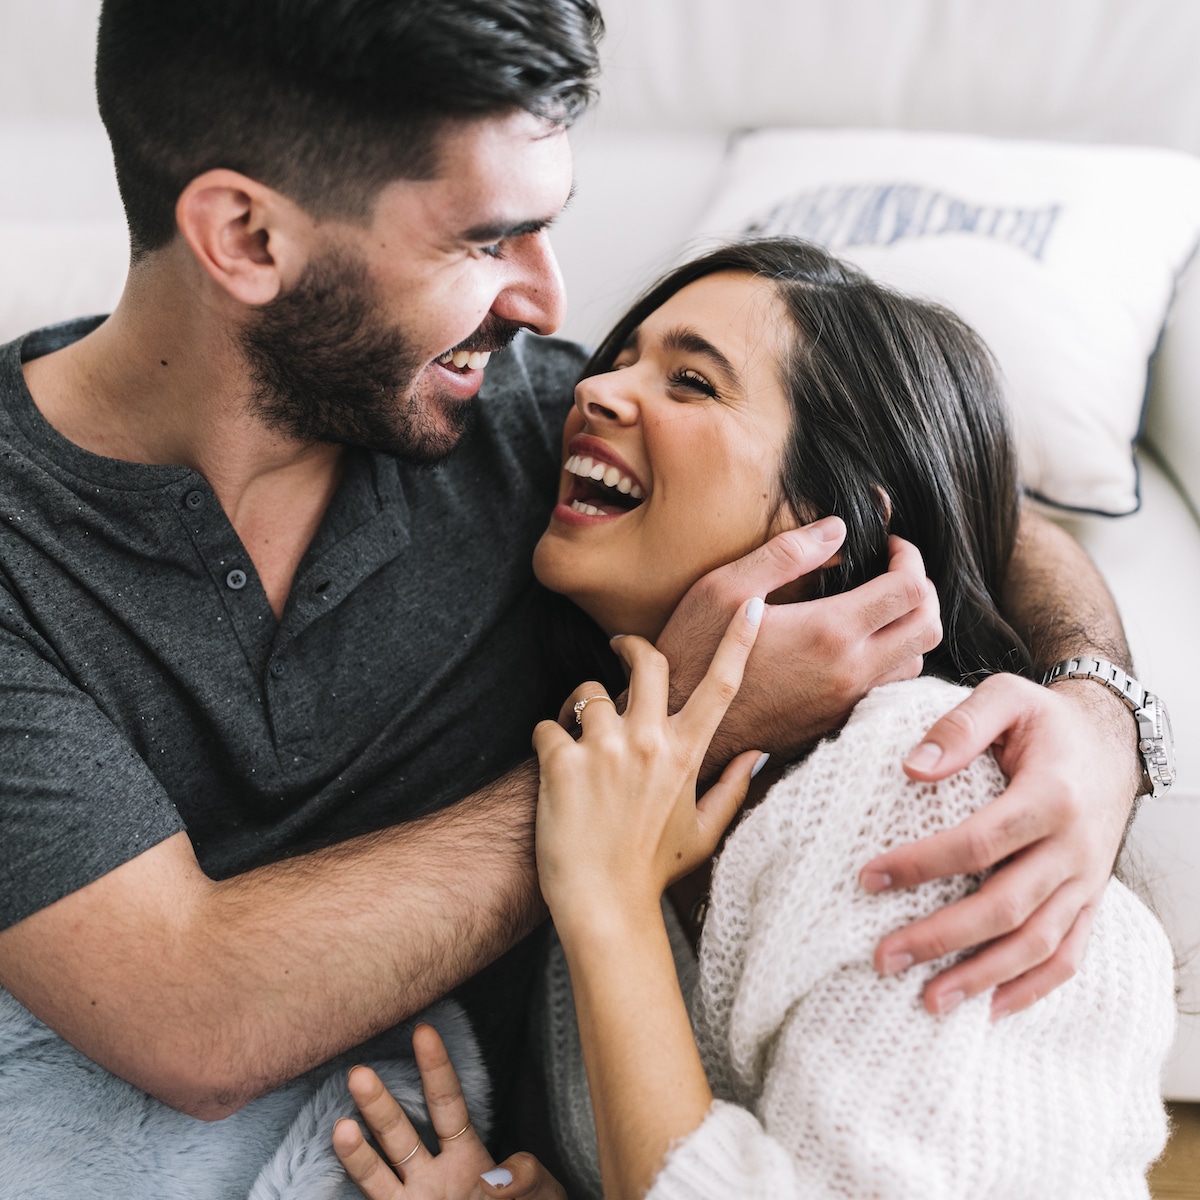 smiling young woman embracing laughing: this is the goal of a new relationship